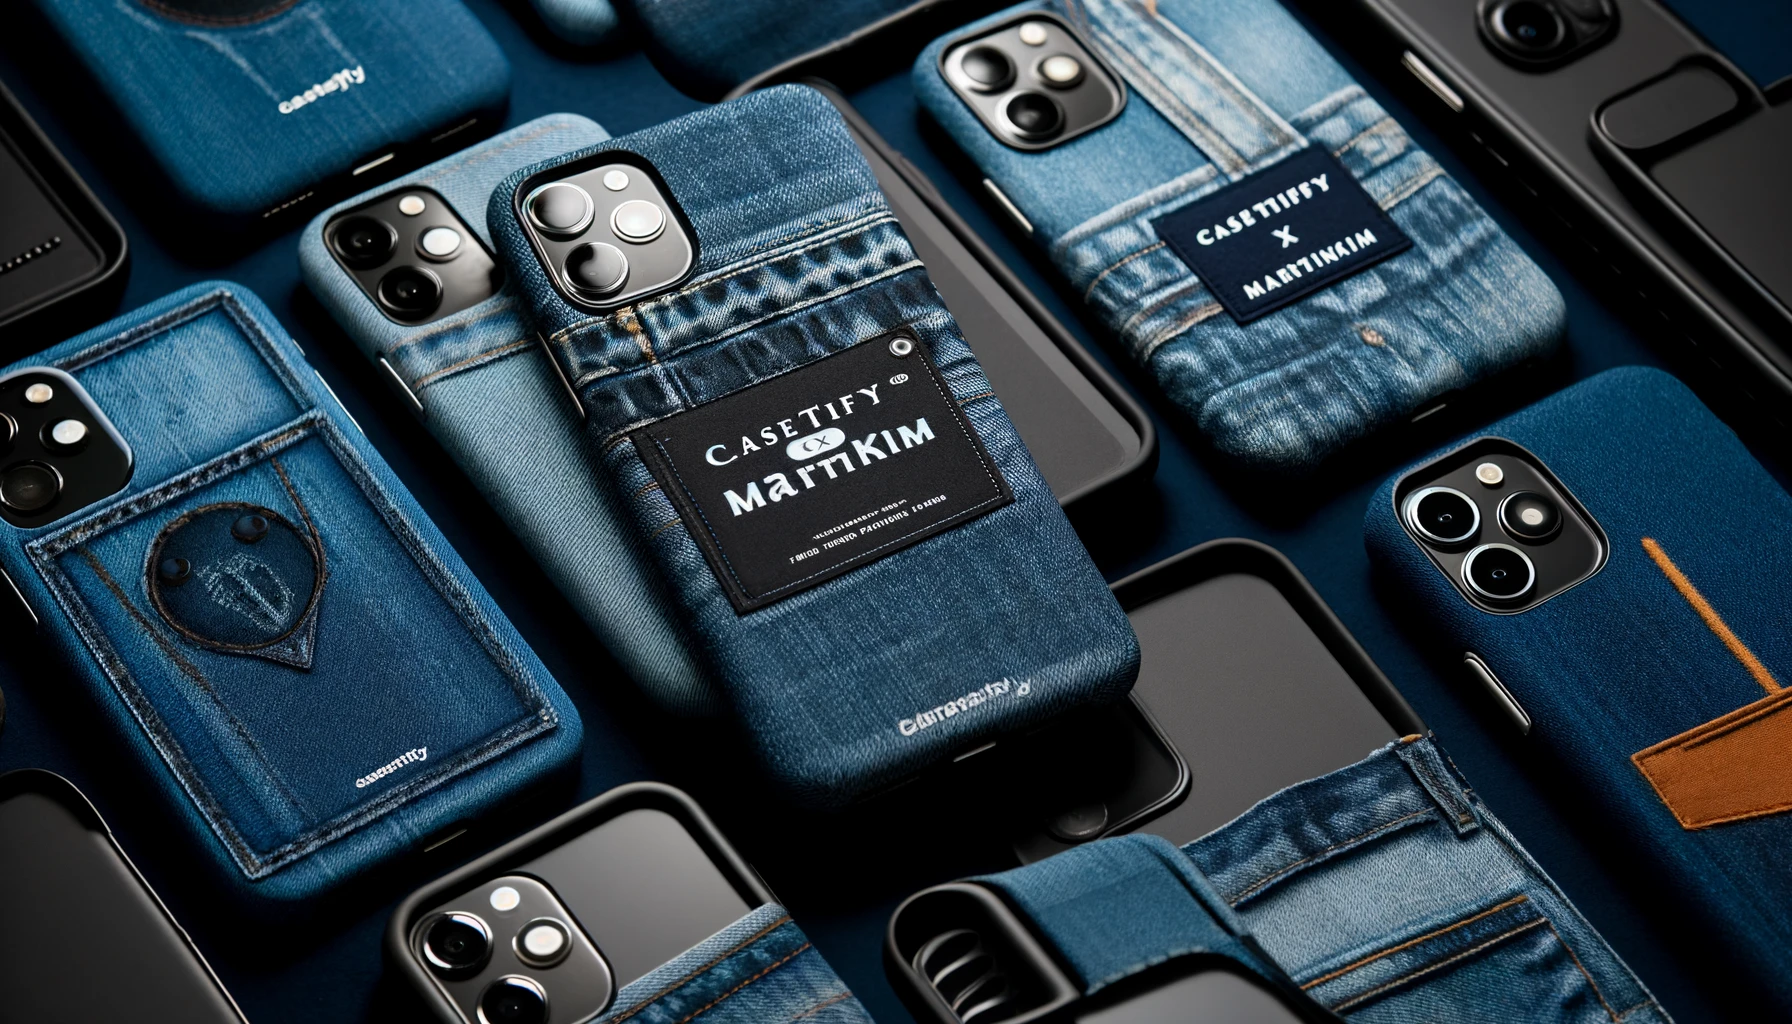 An image showcasing iPhone cases made with denim material from the CASETiFY x MartinKim collaboration. Highlight the texture and stylish look of the denim cases. Include the text 'CASETiFY x MartinKim' prominently in the image.